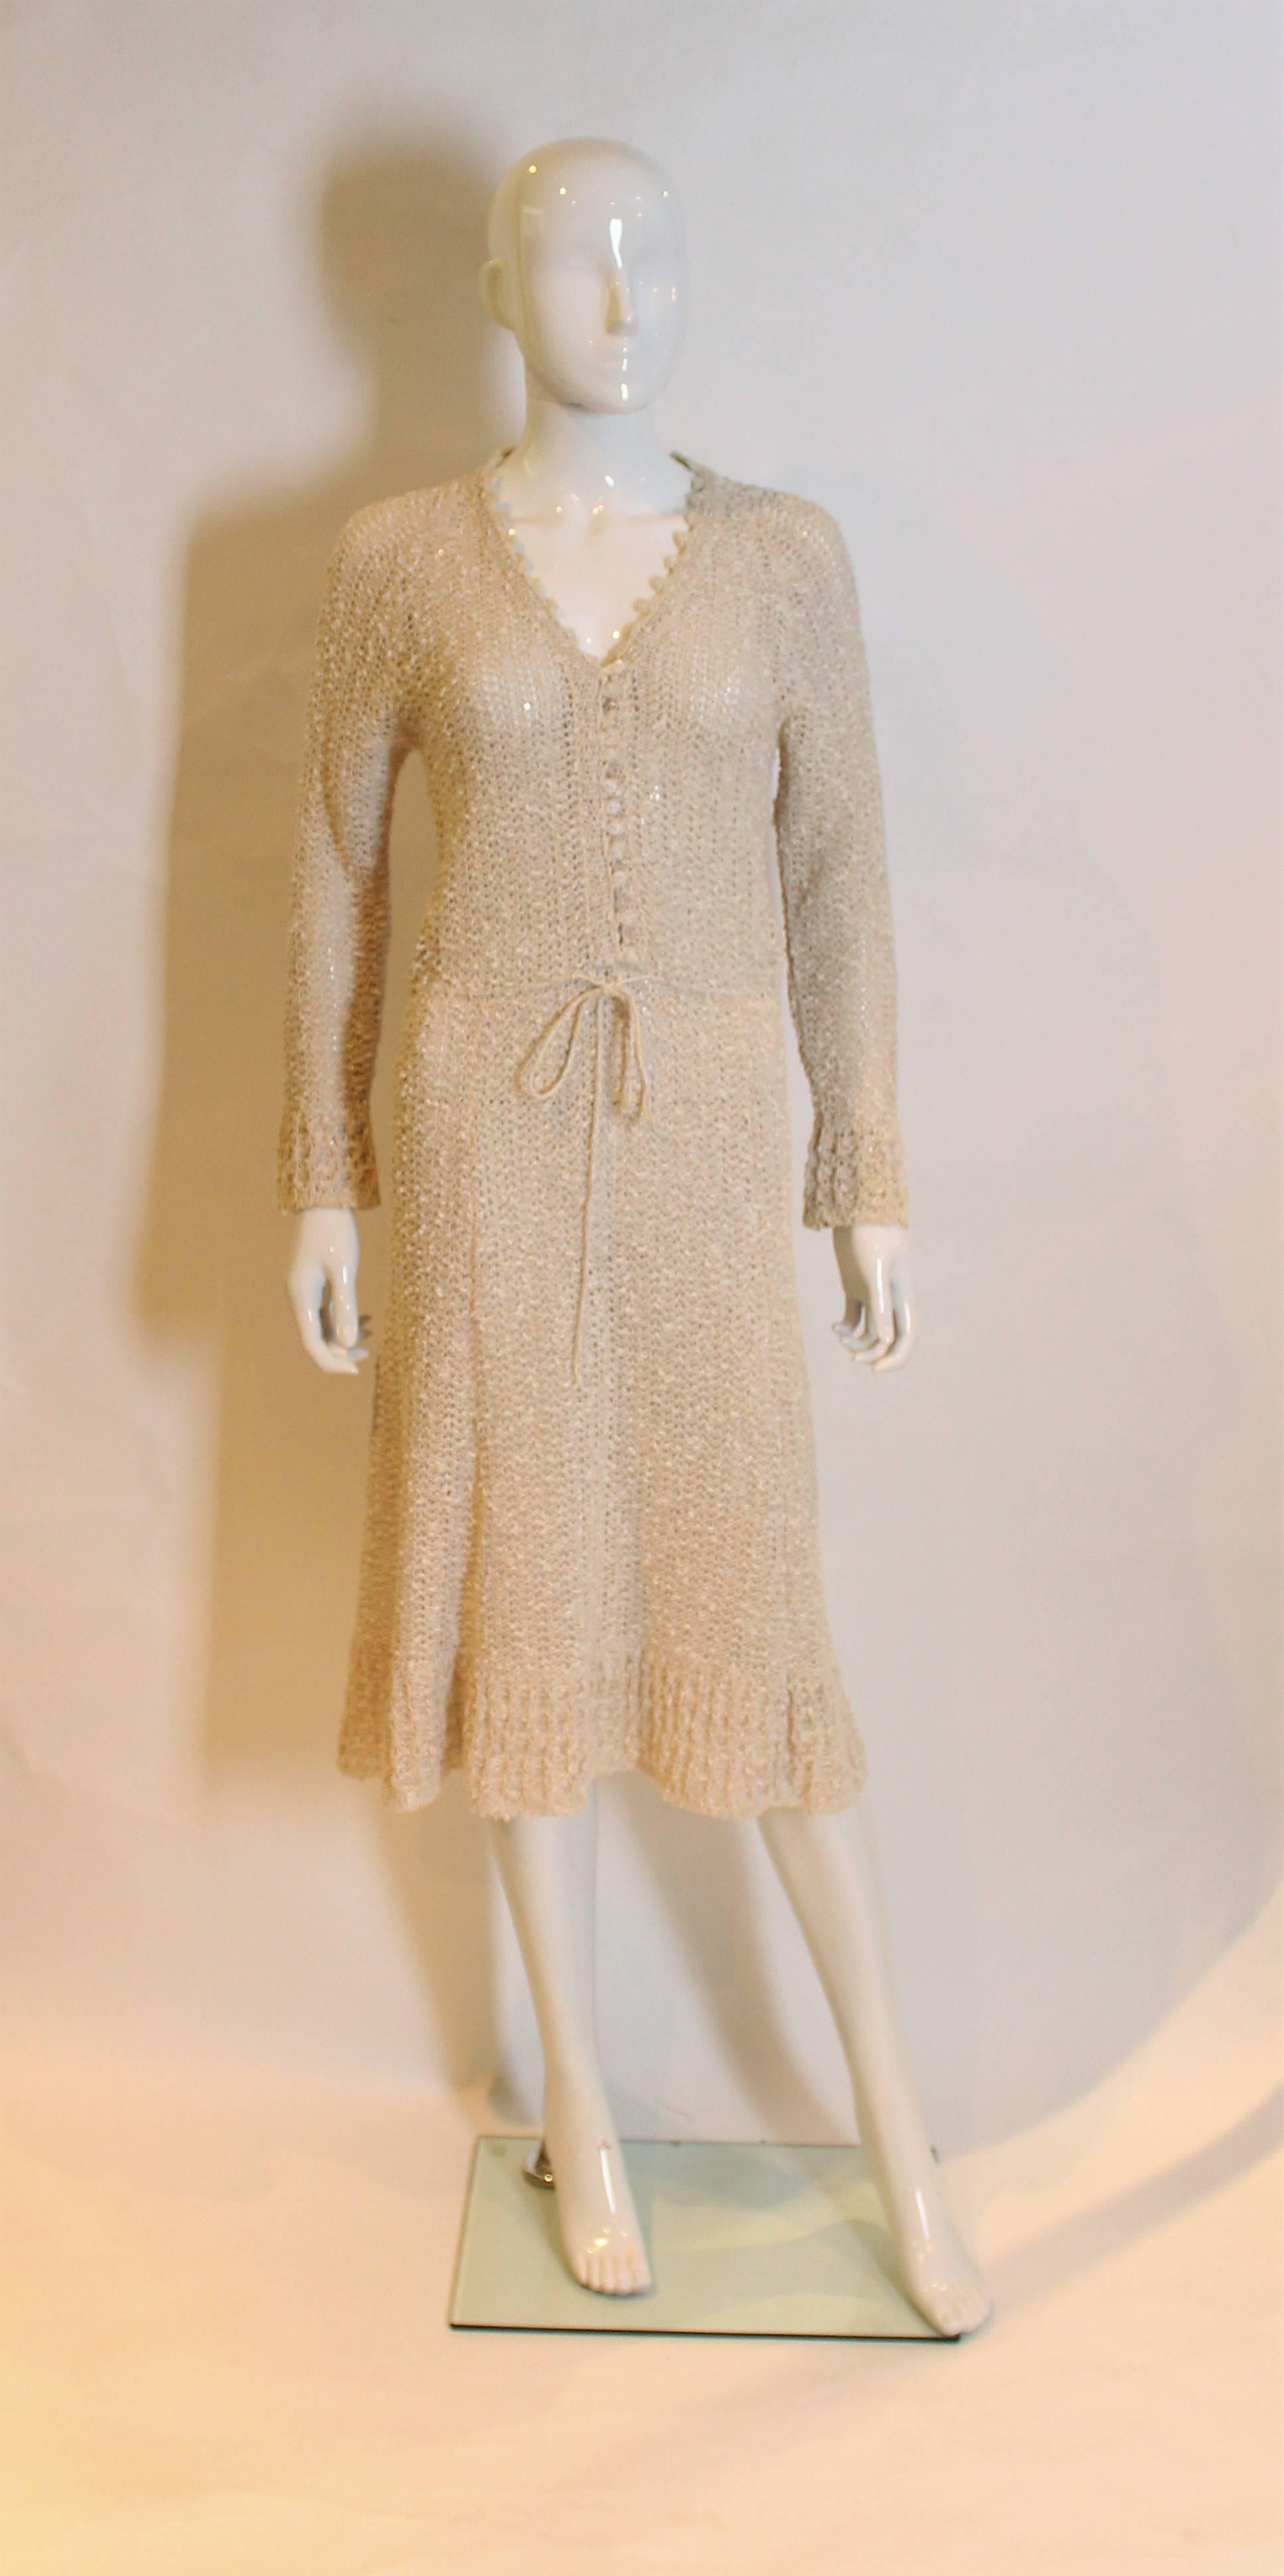 this is a lovey handloomed Irish linen crochet dress.It has a v neckline, long sleeves, and buttons to waist.The waist has drawstring and a flared skirt.